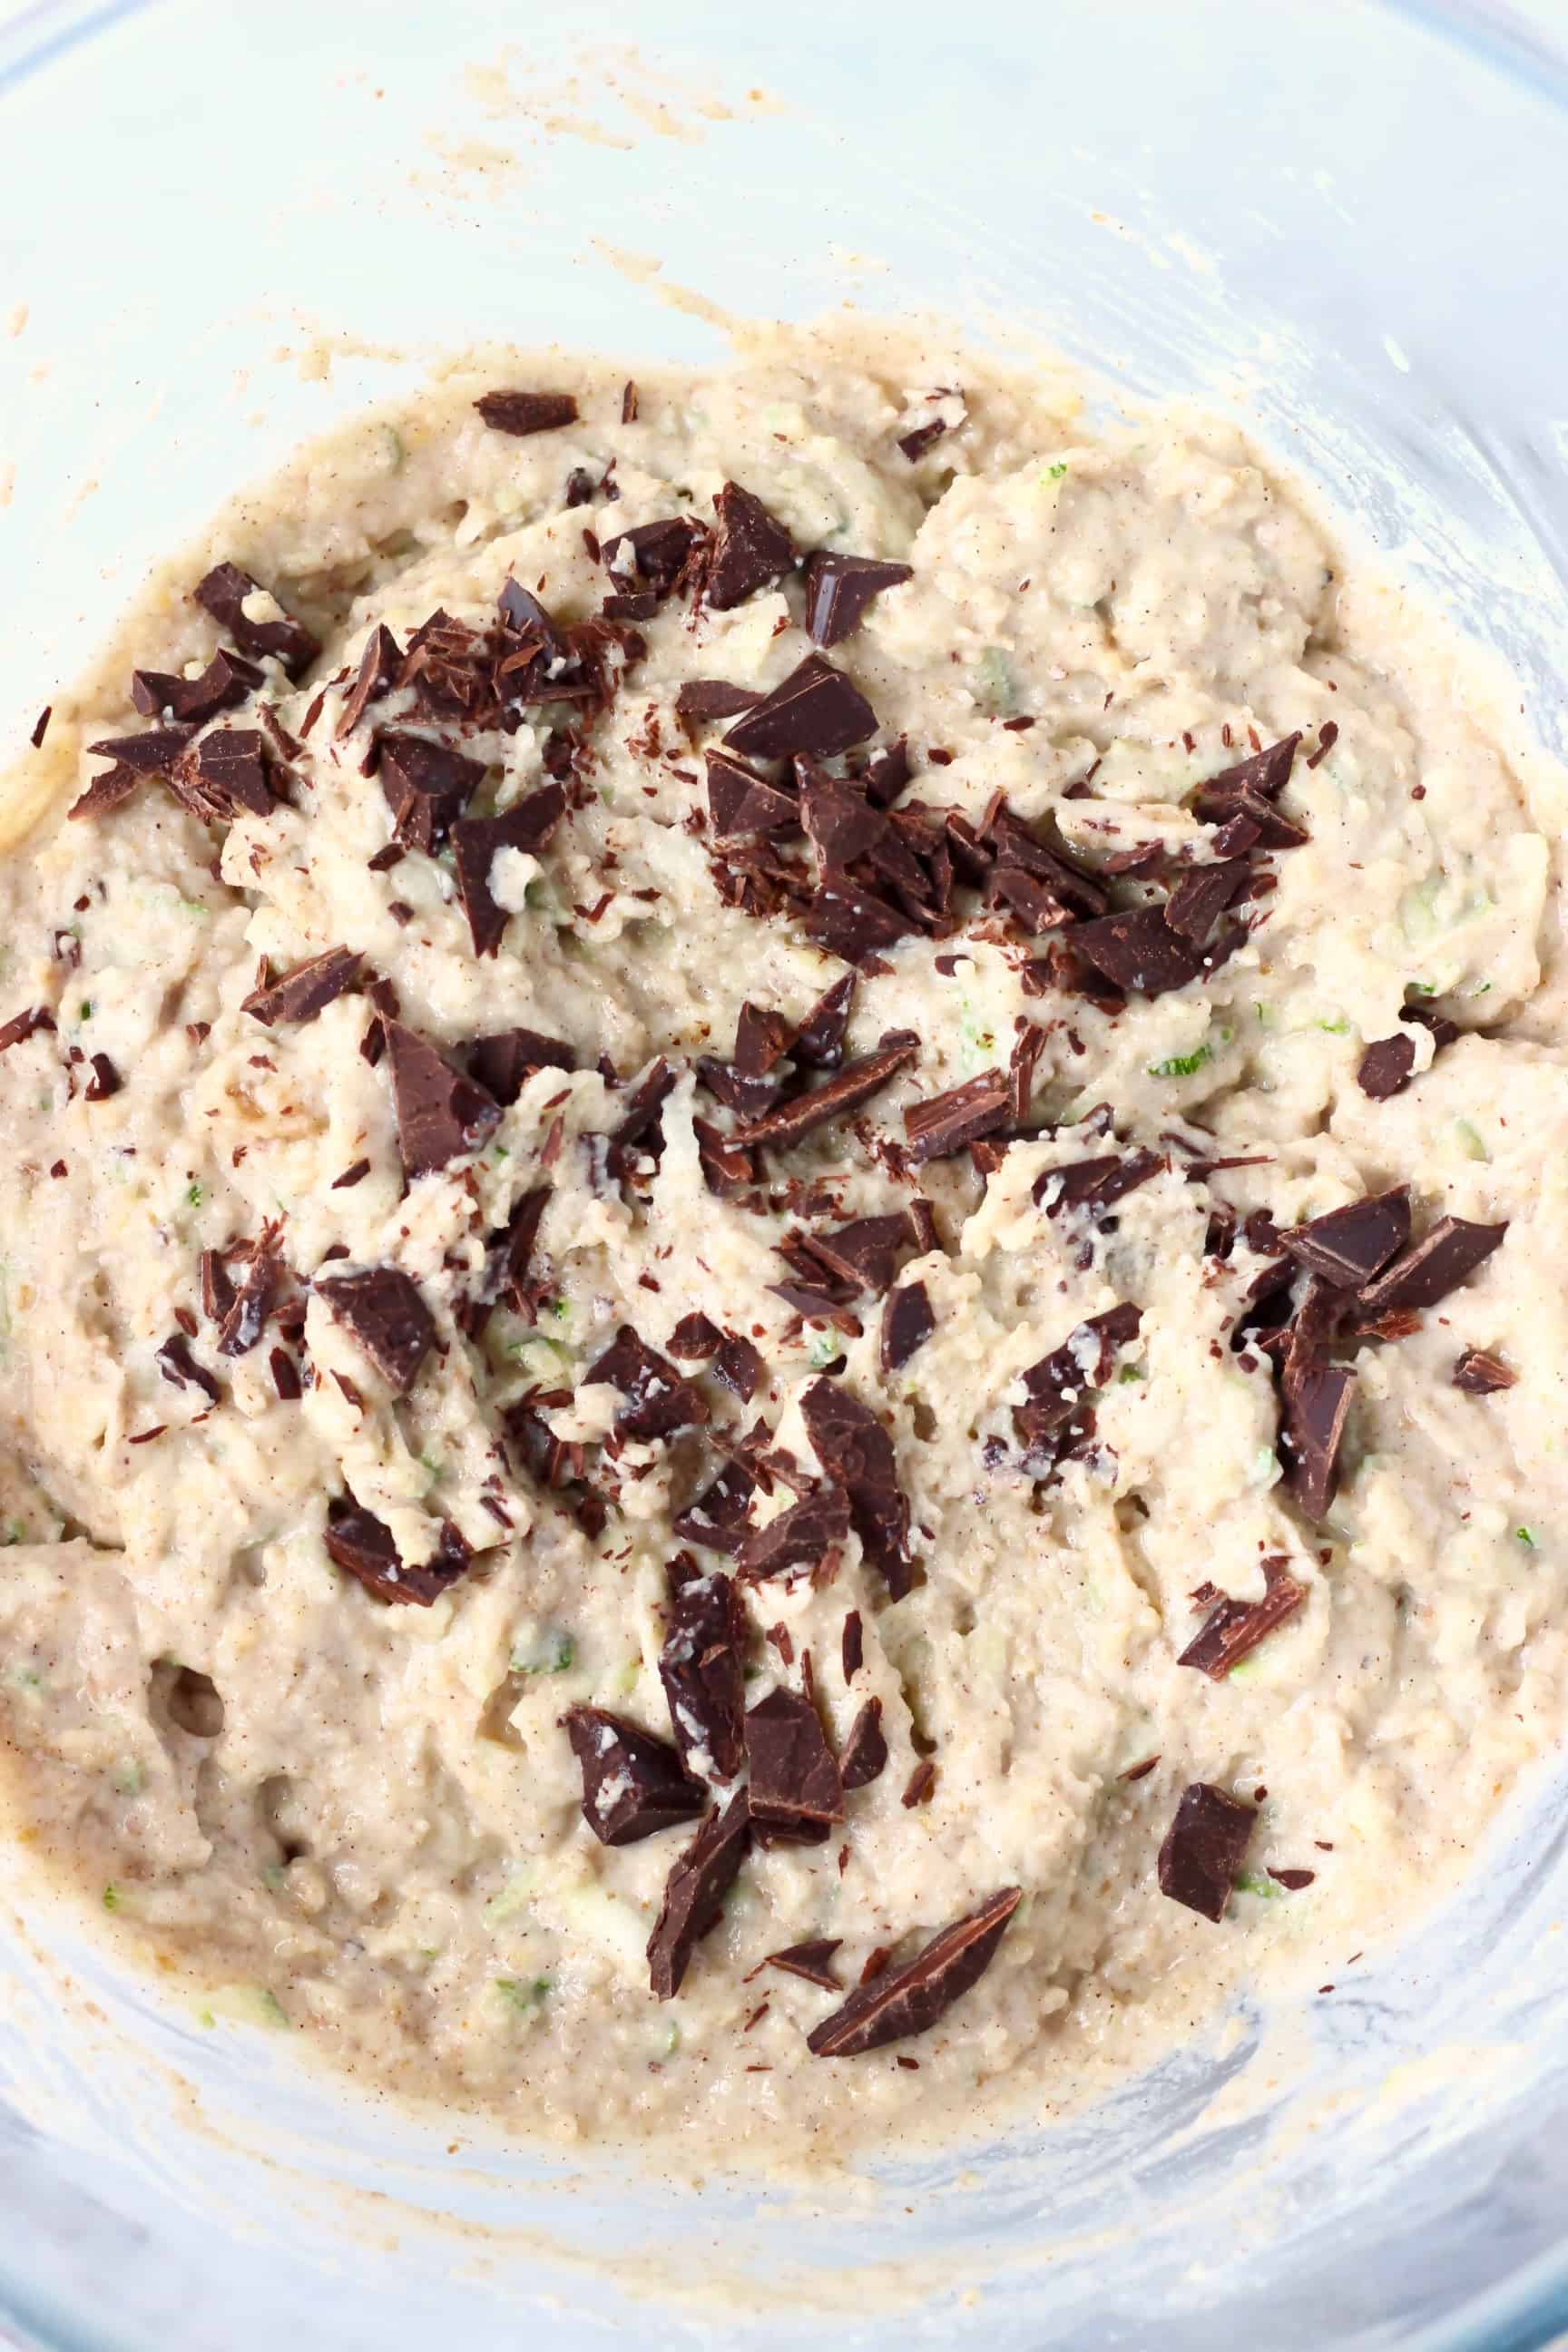 Raw zucchini muffin batter with chocolate chunks in a glass mixing bowl taken from above